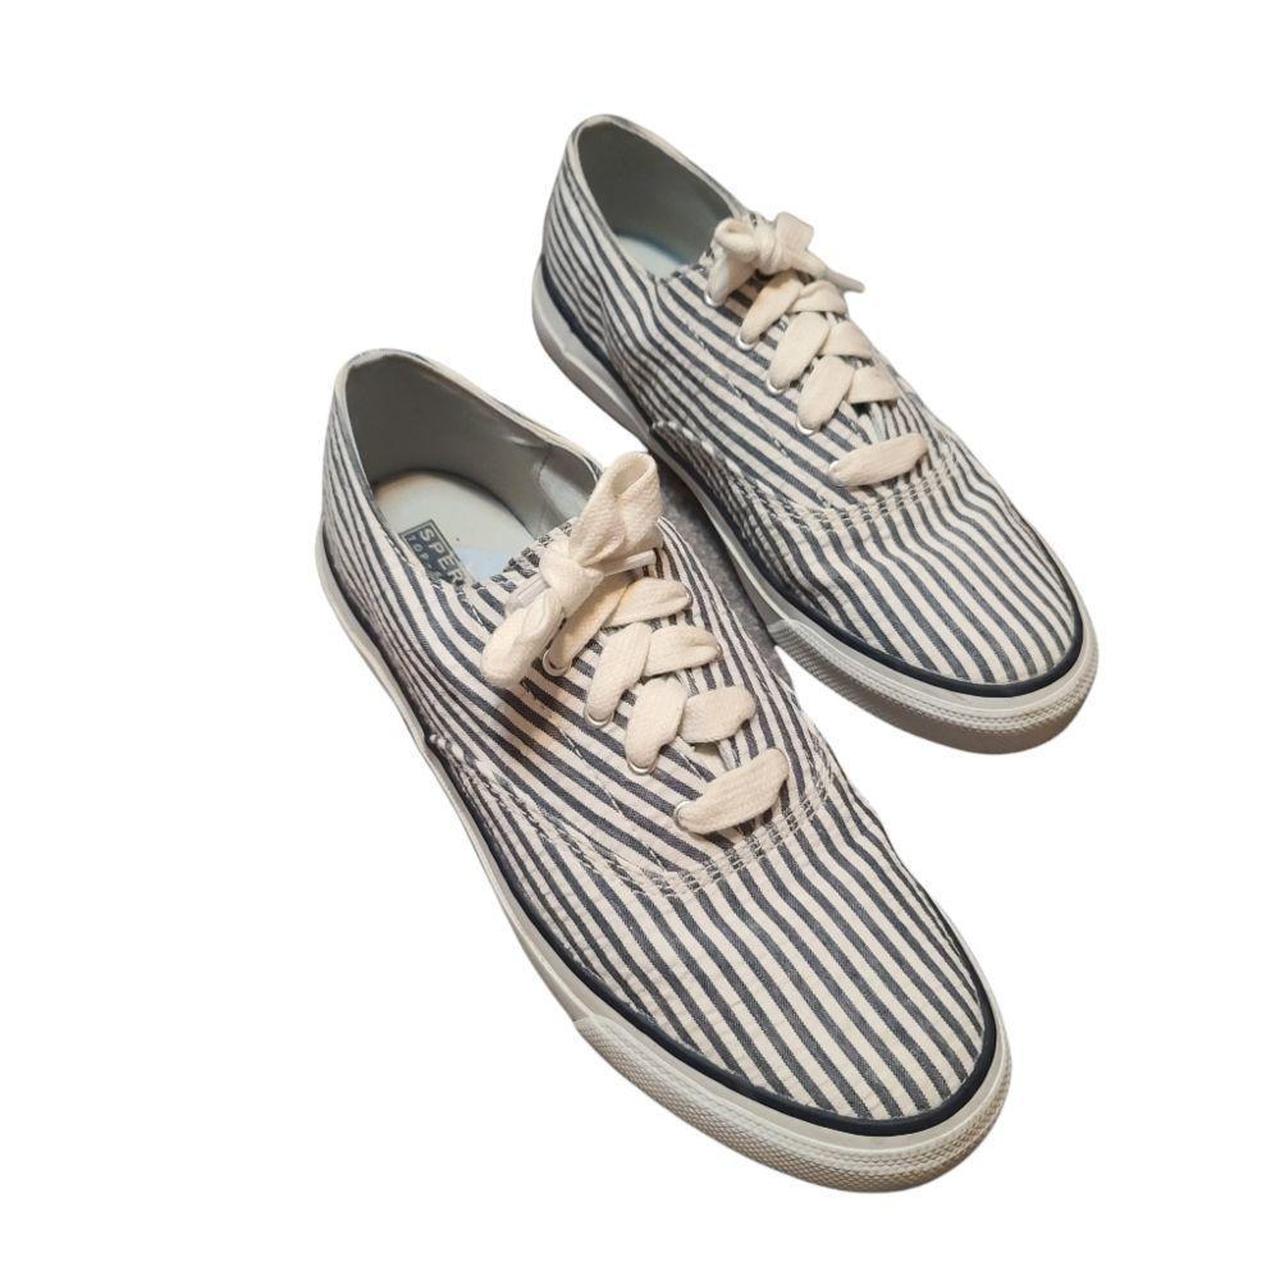 Sperry Women's Blue and White Trainers